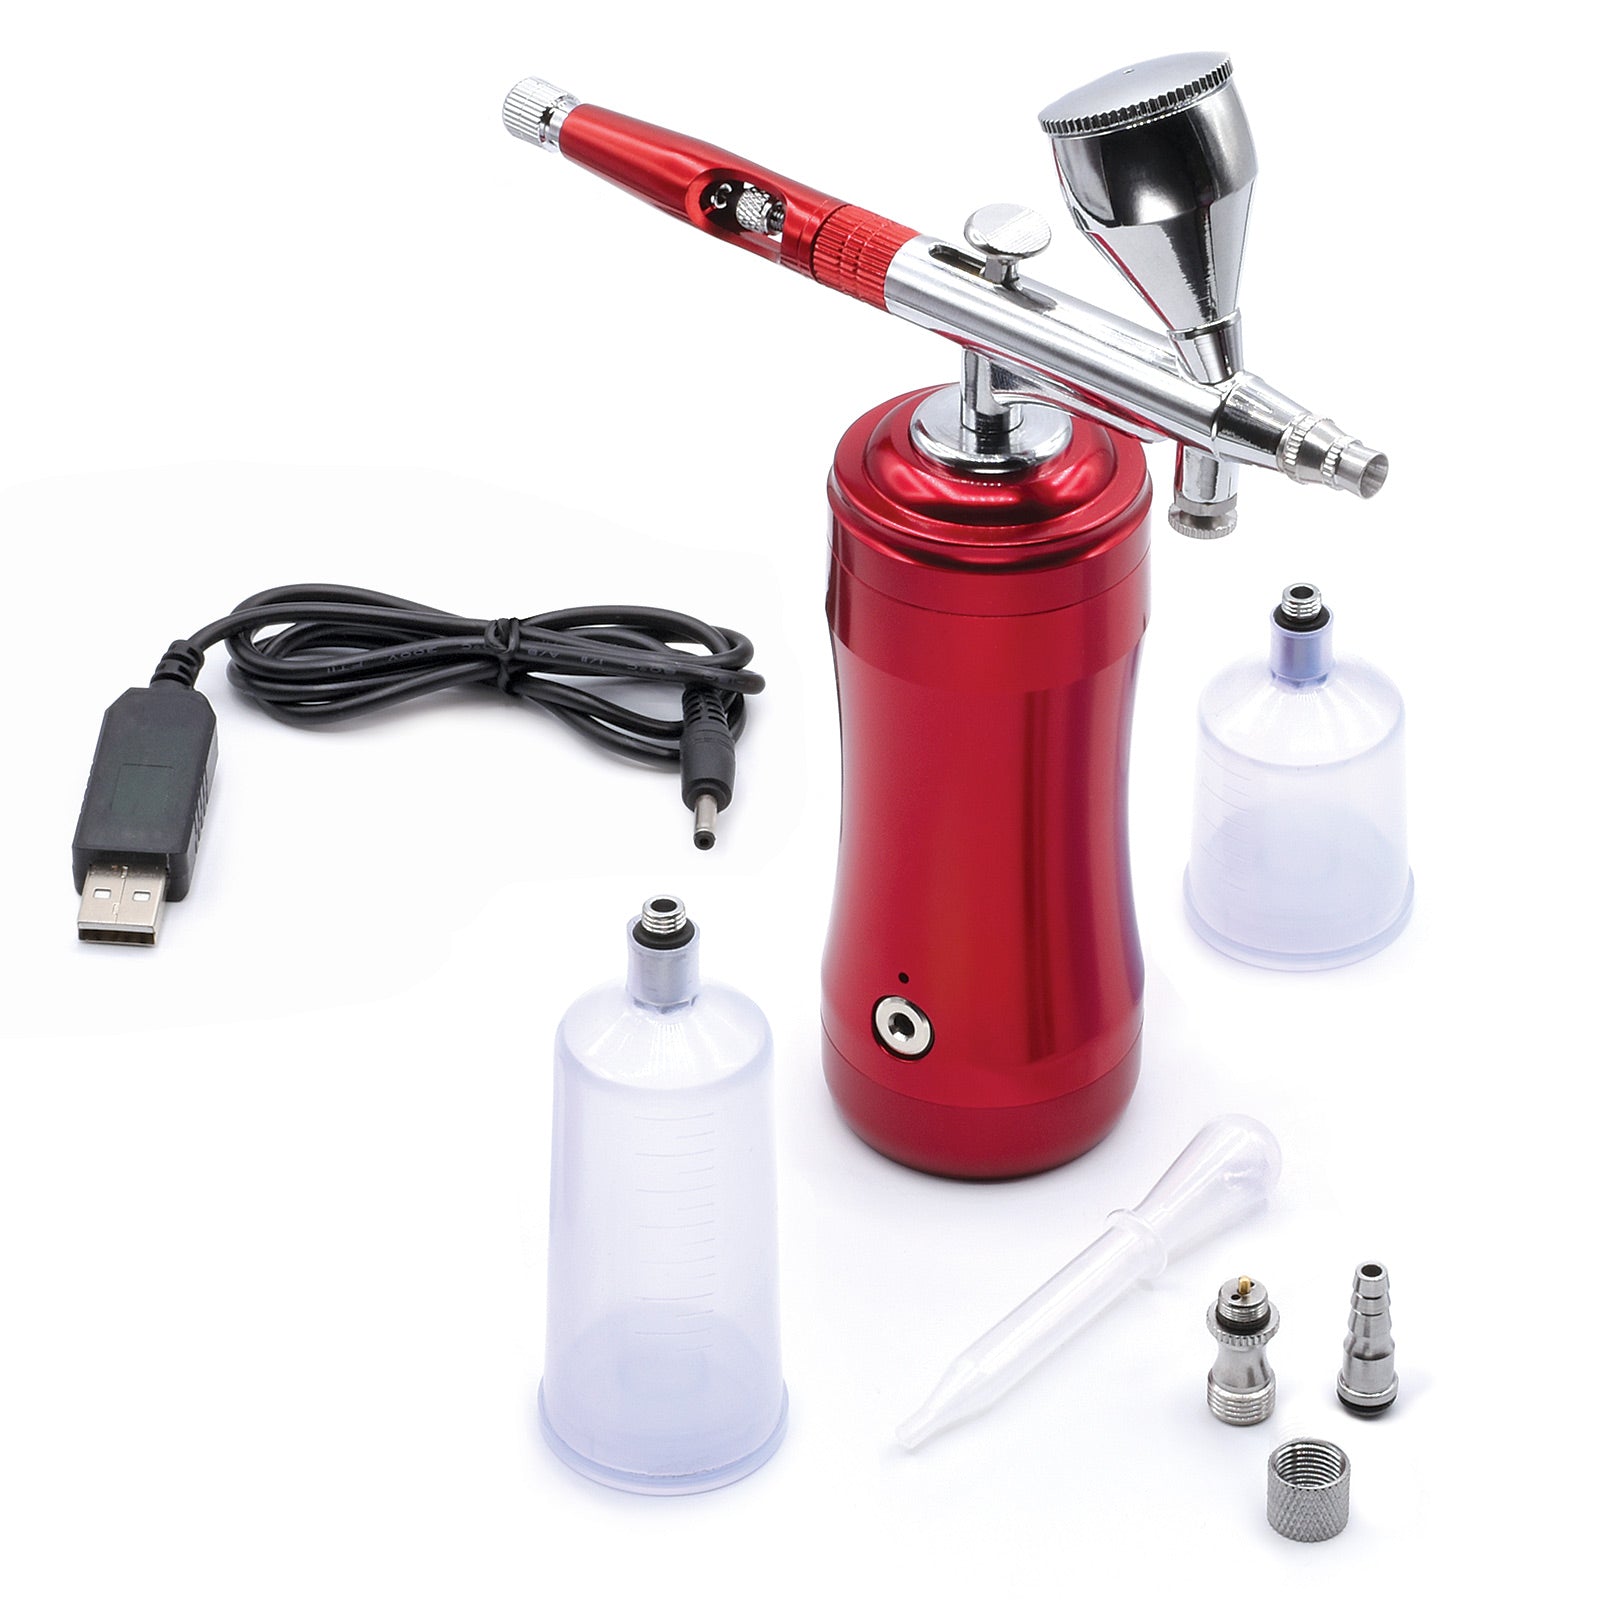 Micro-Mark Self-Contained Portable Fine Detail Airbrush